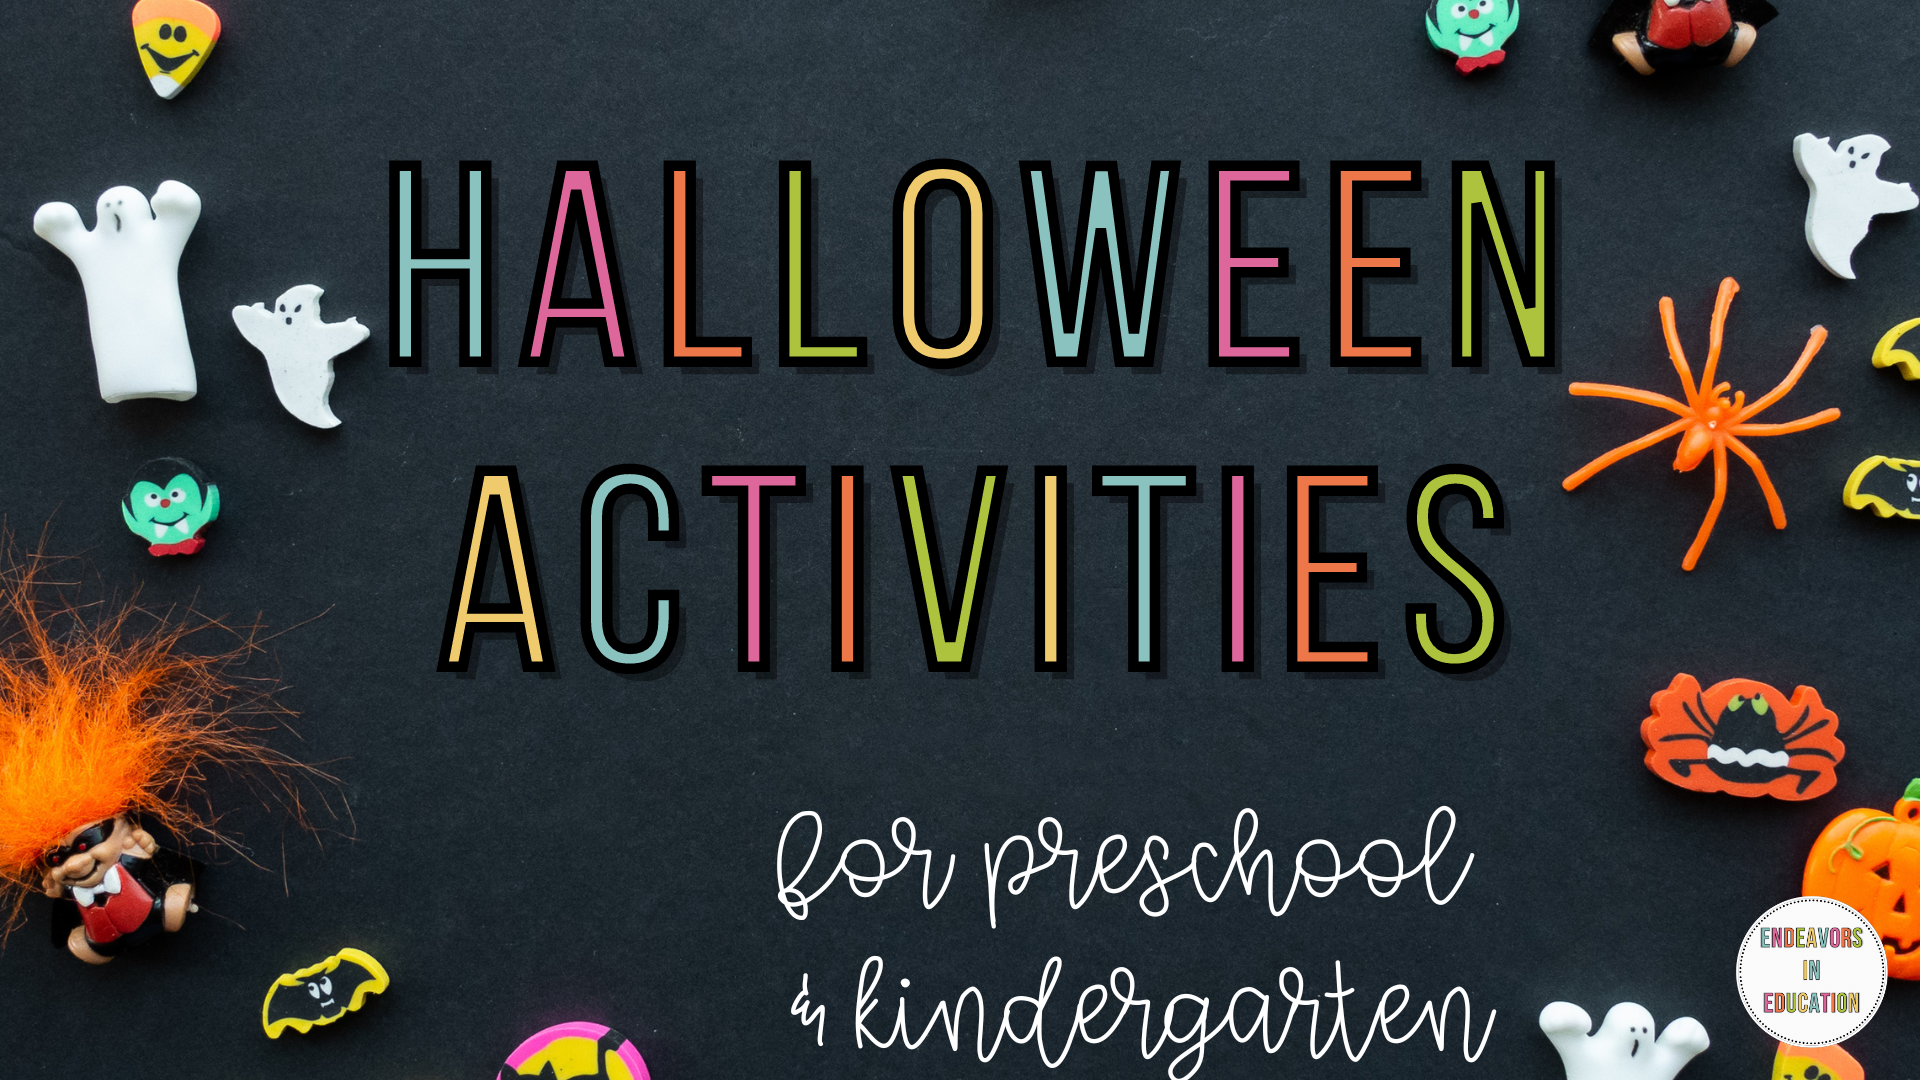 Text says Halloween activities for preschool and kindergarten on a black background surrounded by halloween trinkets